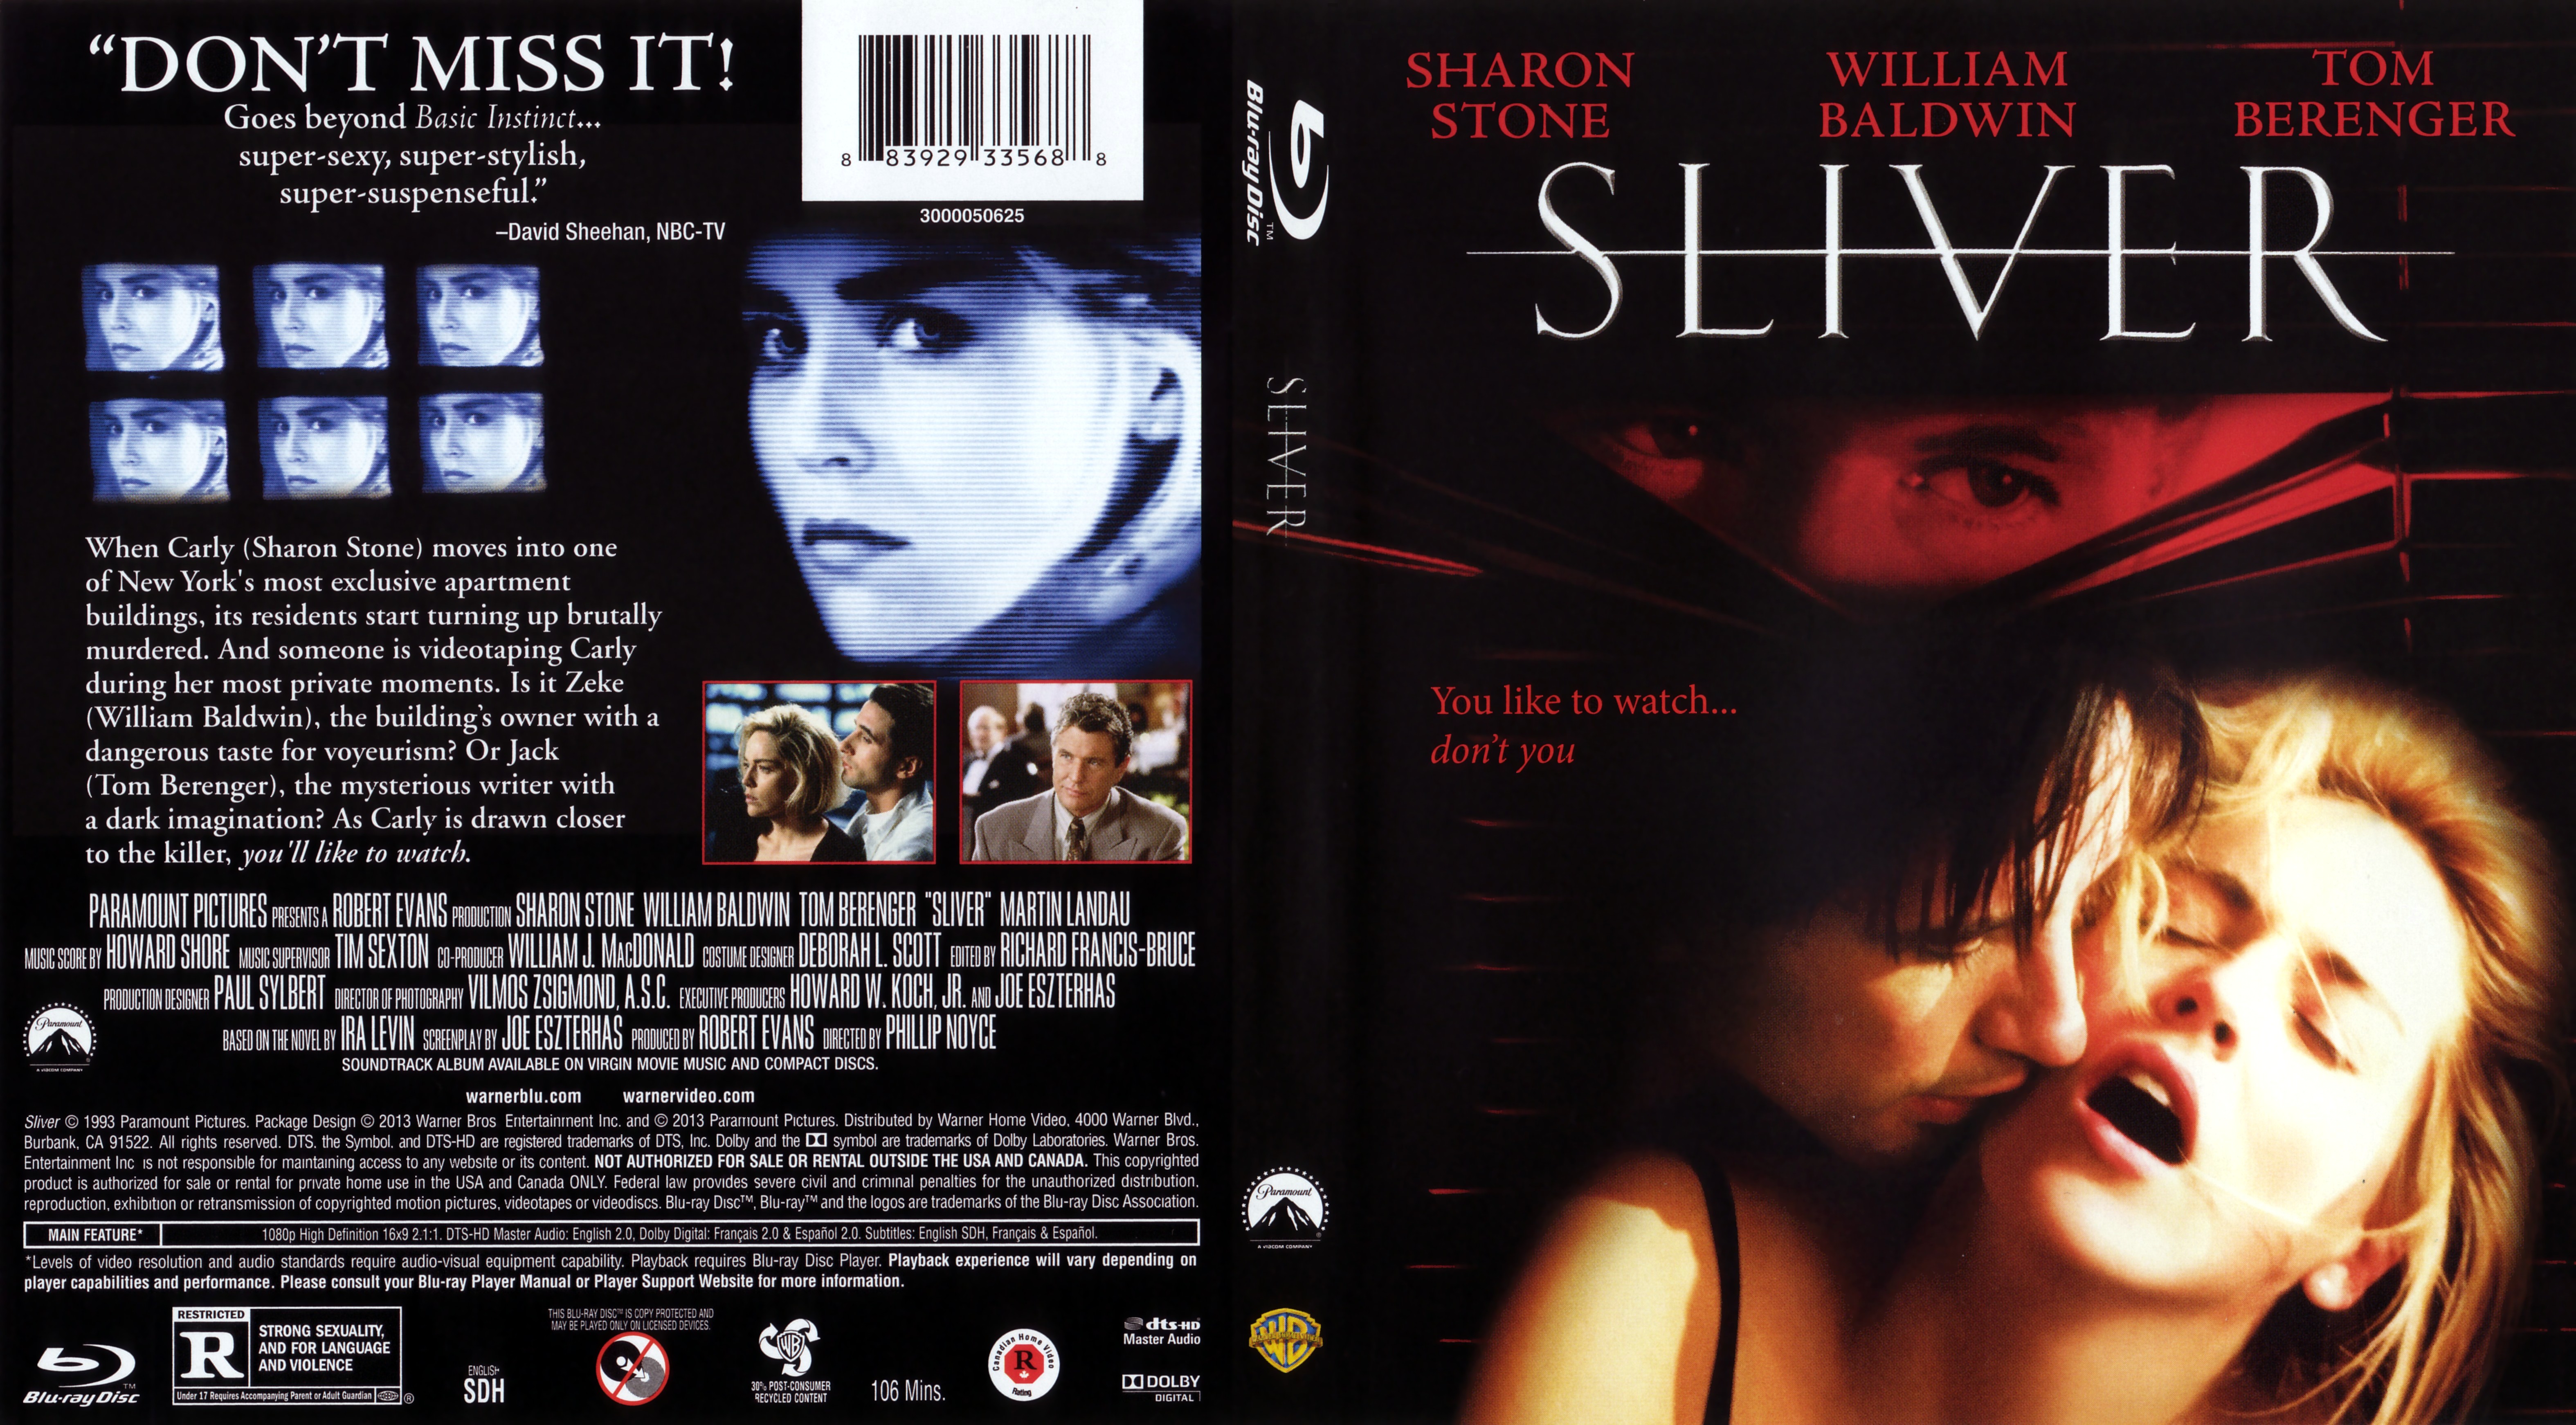 Jaquette DVD Sliver Zone 1 (BLU-RAY)